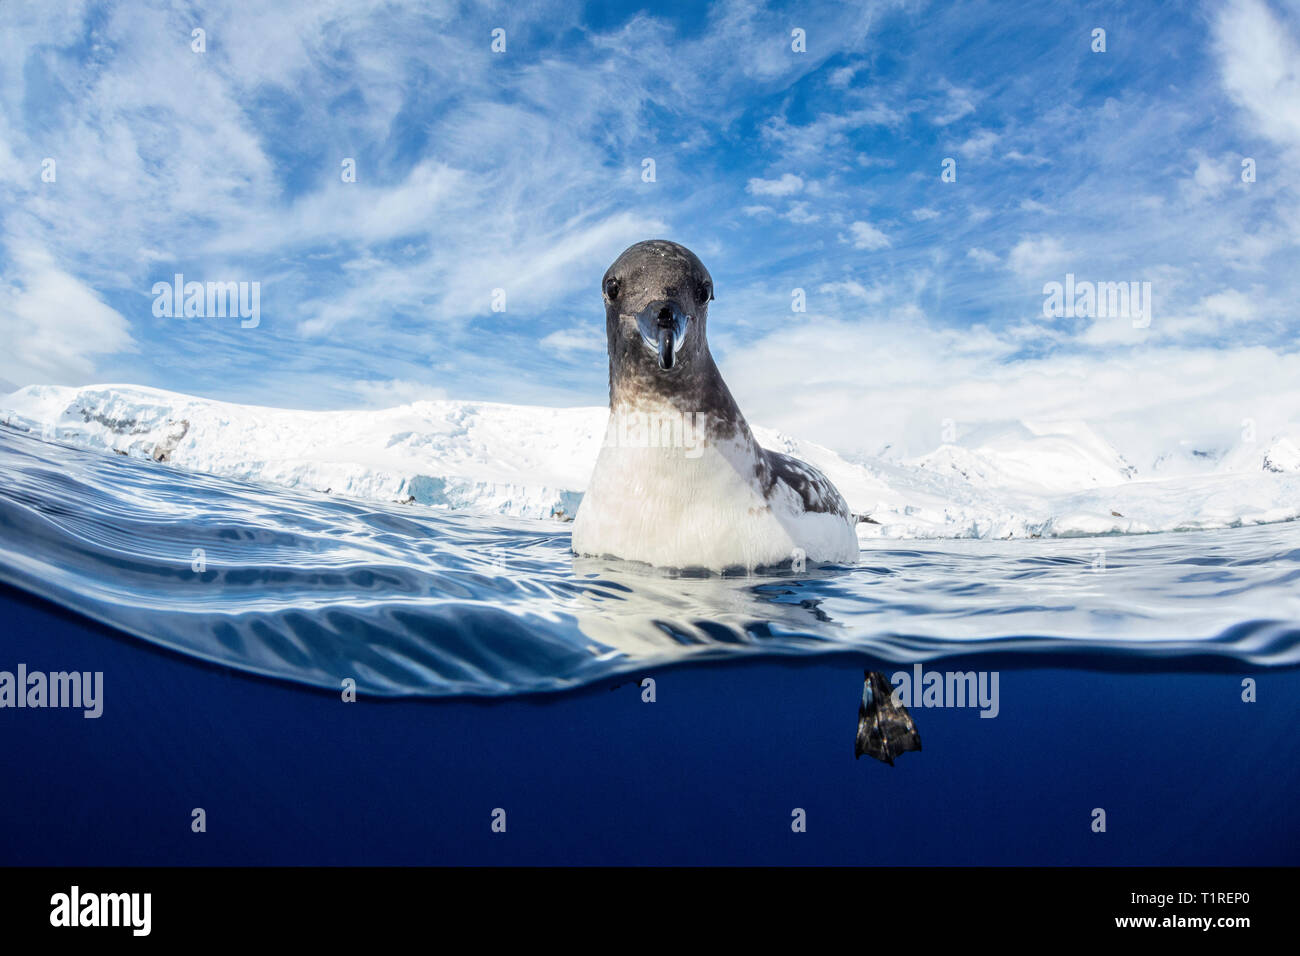 Up close and personal with a Cape petrel (Daption capense) floating on the water, Lindblad Cove, Trinity Peninsula, Antarctica Stock Photo